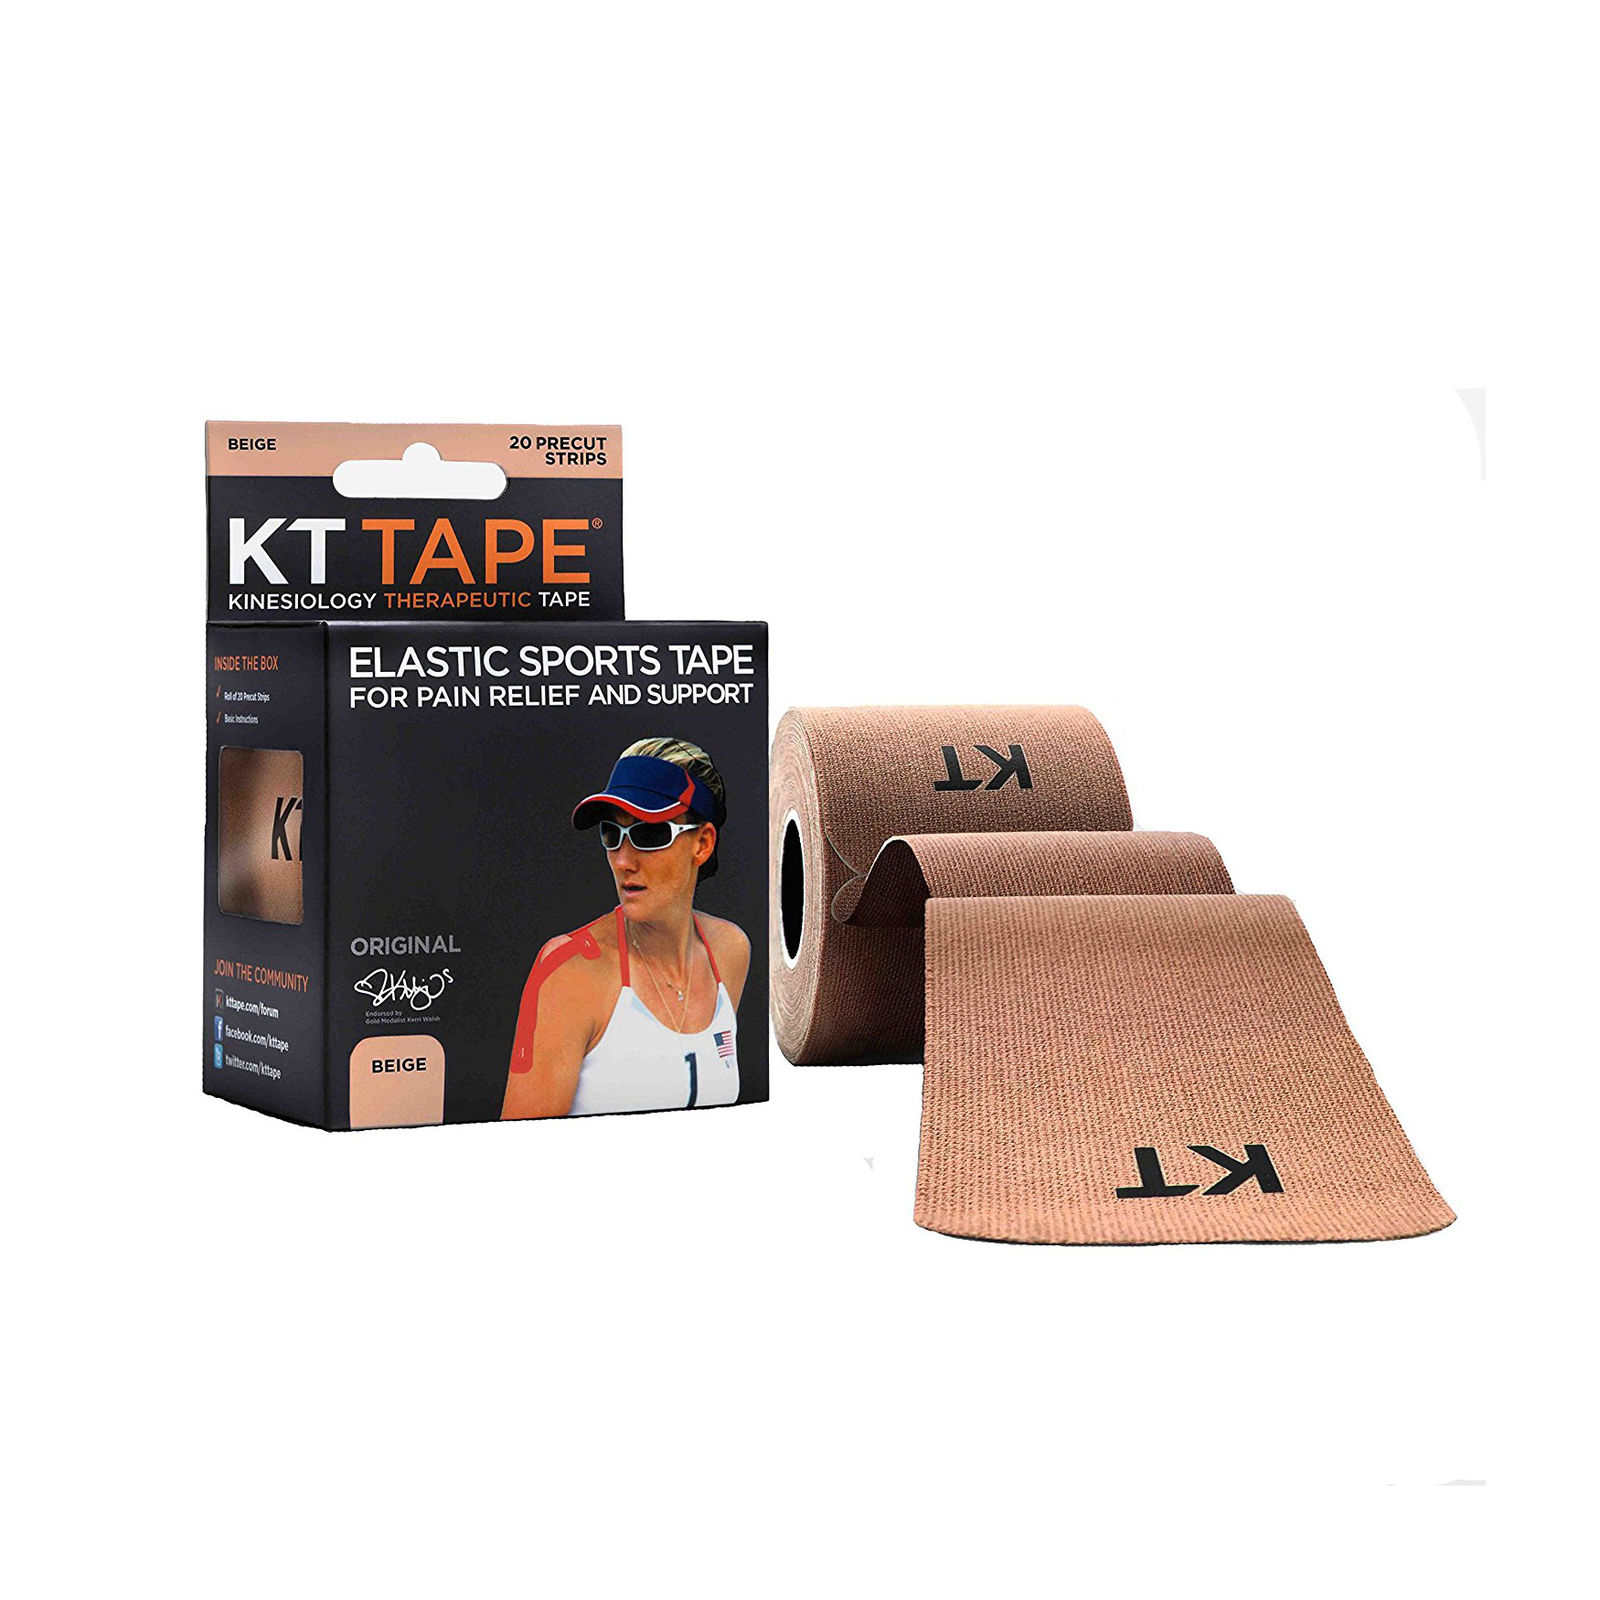 KT Tape Original Cotton Elastic Kinesiology Therapeutic Sports Tape